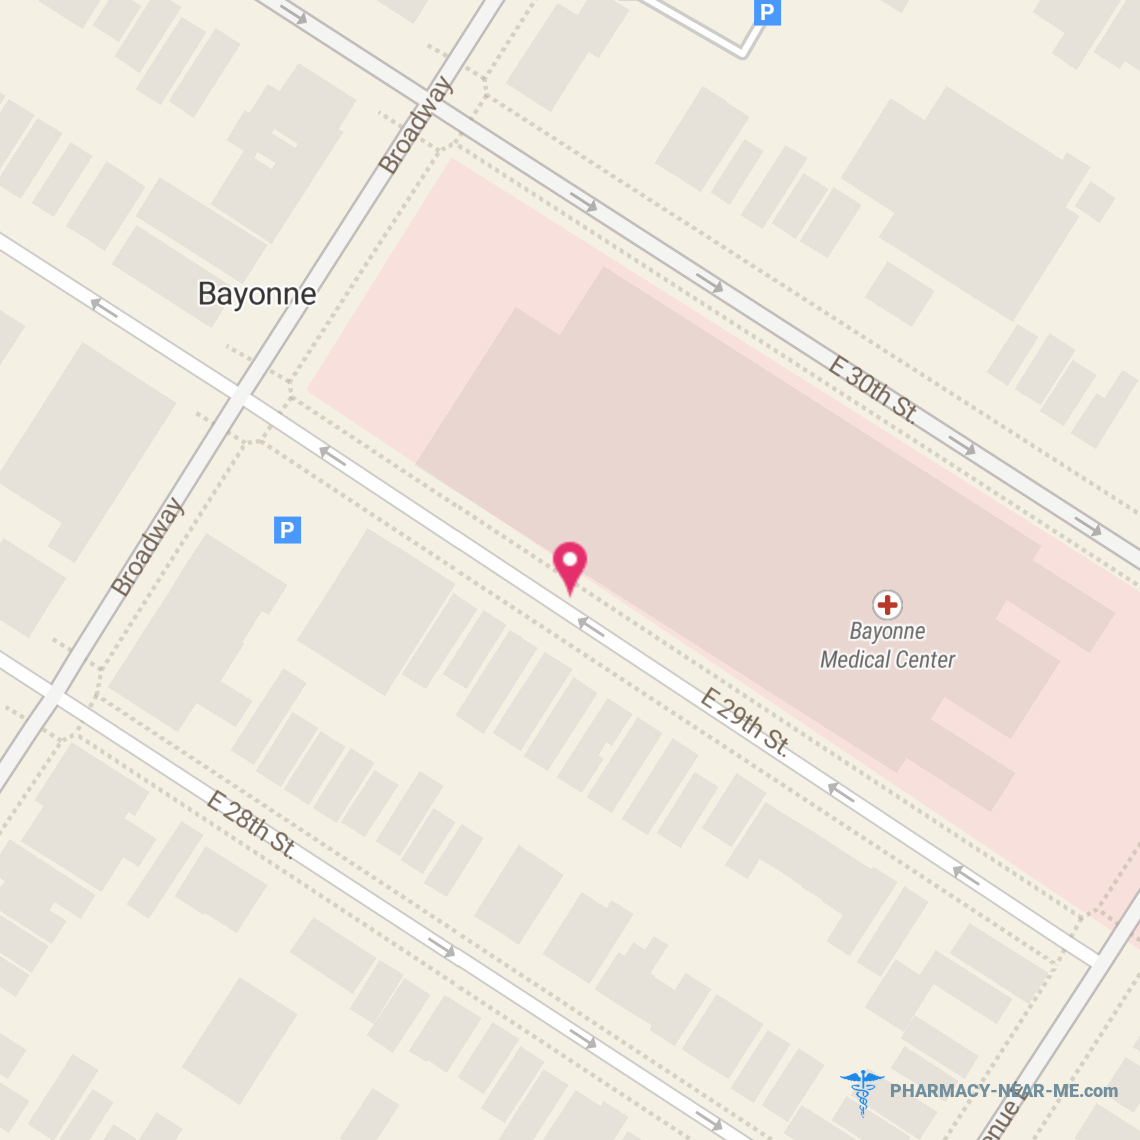 BMC PHARMACY - Pharmacy Hours, Phone, Reviews & Information: 29 East 29th Street, Bayonne, New Jersey 07002, United States